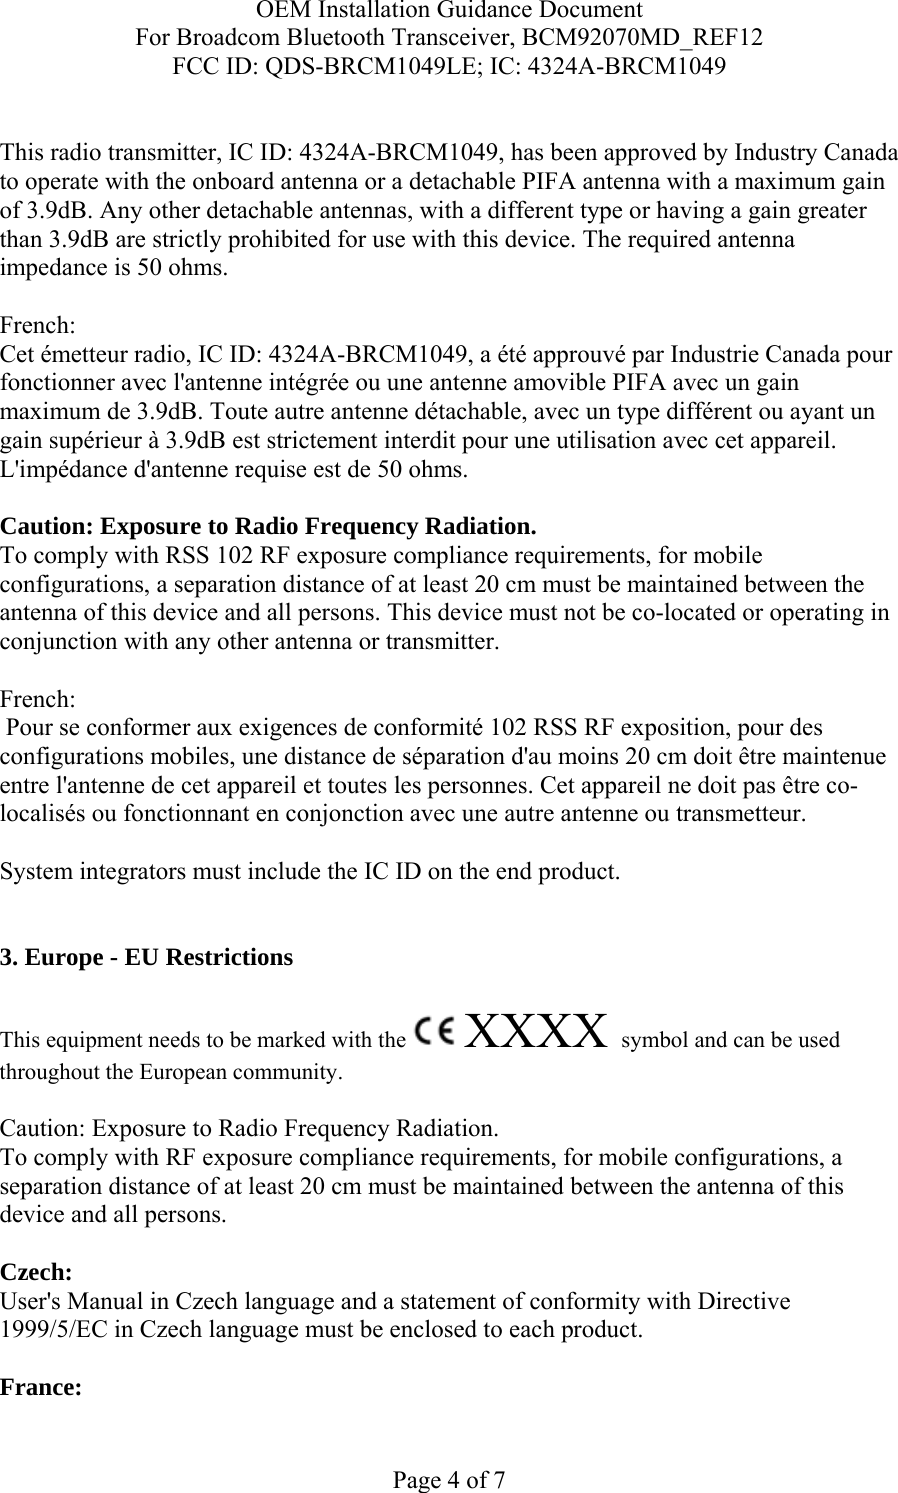 OEM Installation Guidance Document For Broadcom Bluetooth Transceiver, BCM92070MD_REF12 FCC ID: QDS-BRCM1049LE; IC: 4324A-BRCM1049  Page 4 of 7  This radio transmitter, IC ID: 4324A-BRCM1049, has been approved by Industry Canada to operate with the onboard antenna or a detachable PIFA antenna with a maximum gain of 3.9dB. Any other detachable antennas, with a different type or having a gain greater than 3.9dB are strictly prohibited for use with this device. The required antenna impedance is 50 ohms.  French:  Cet émetteur radio, IC ID: 4324A-BRCM1049, a été approuvé par Industrie Canada pour fonctionner avec l&apos;antenne intégrée ou une antenne amovible PIFA avec un gain maximum de 3.9dB. Toute autre antenne détachable, avec un type différent ou ayant un gain supérieur à 3.9dB est strictement interdit pour une utilisation avec cet appareil. L&apos;impédance d&apos;antenne requise est de 50 ohms.  Caution: Exposure to Radio Frequency Radiation. To comply with RSS 102 RF exposure compliance requirements, for mobile configurations, a separation distance of at least 20 cm must be maintained between the antenna of this device and all persons. This device must not be co-located or operating in conjunction with any other antenna or transmitter.  French:   Pour se conformer aux exigences de conformité 102 RSS RF exposition, pour des configurations mobiles, une distance de séparation d&apos;au moins 20 cm doit être maintenue entre l&apos;antenne de cet appareil et toutes les personnes. Cet appareil ne doit pas être co-localisés ou fonctionnant en conjonction avec une autre antenne ou transmetteur.  System integrators must include the IC ID on the end product.    3. Europe - EU Restrictions This equipment needs to be marked with the   XXXX symbol and can be used throughout the European community.  Caution: Exposure to Radio Frequency Radiation.   To comply with RF exposure compliance requirements, for mobile configurations, a separation distance of at least 20 cm must be maintained between the antenna of this device and all persons.  Czech:  User&apos;s Manual in Czech language and a statement of conformity with Directive 1999/5/EC in Czech language must be enclosed to each product.   France: 